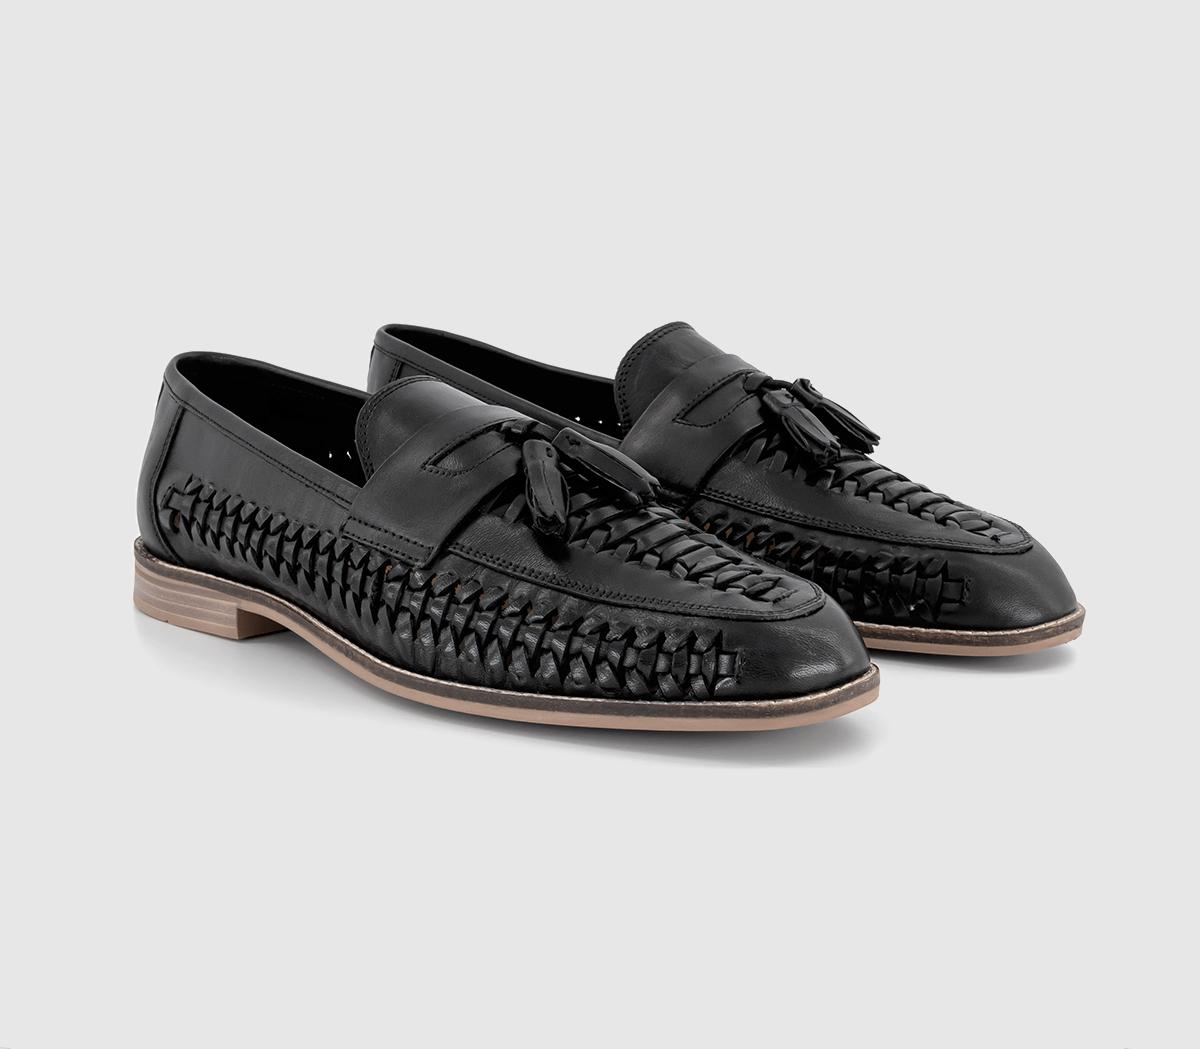 OFFICE Mens Clapham Tassel Woven Loafers Black Leather, 10